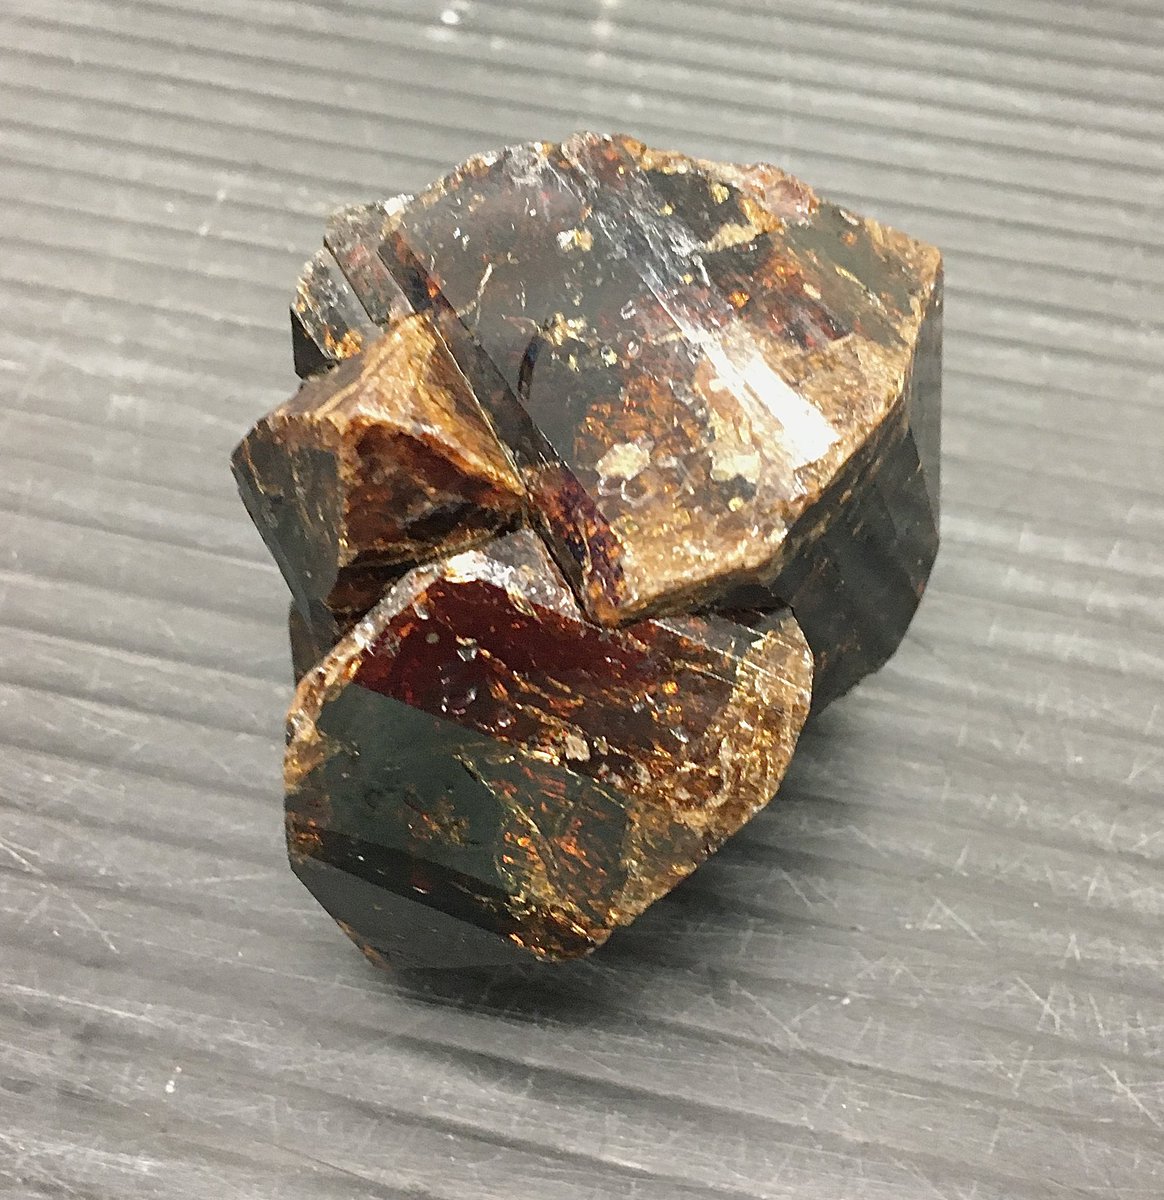 In honour of the newly crowned #MinCup23 winner zircon, here is one of my favourite specimens of the mineral. This crystal cluster is from Seiland Island, Norway. #MineralMonday #GeoscienceTwitter